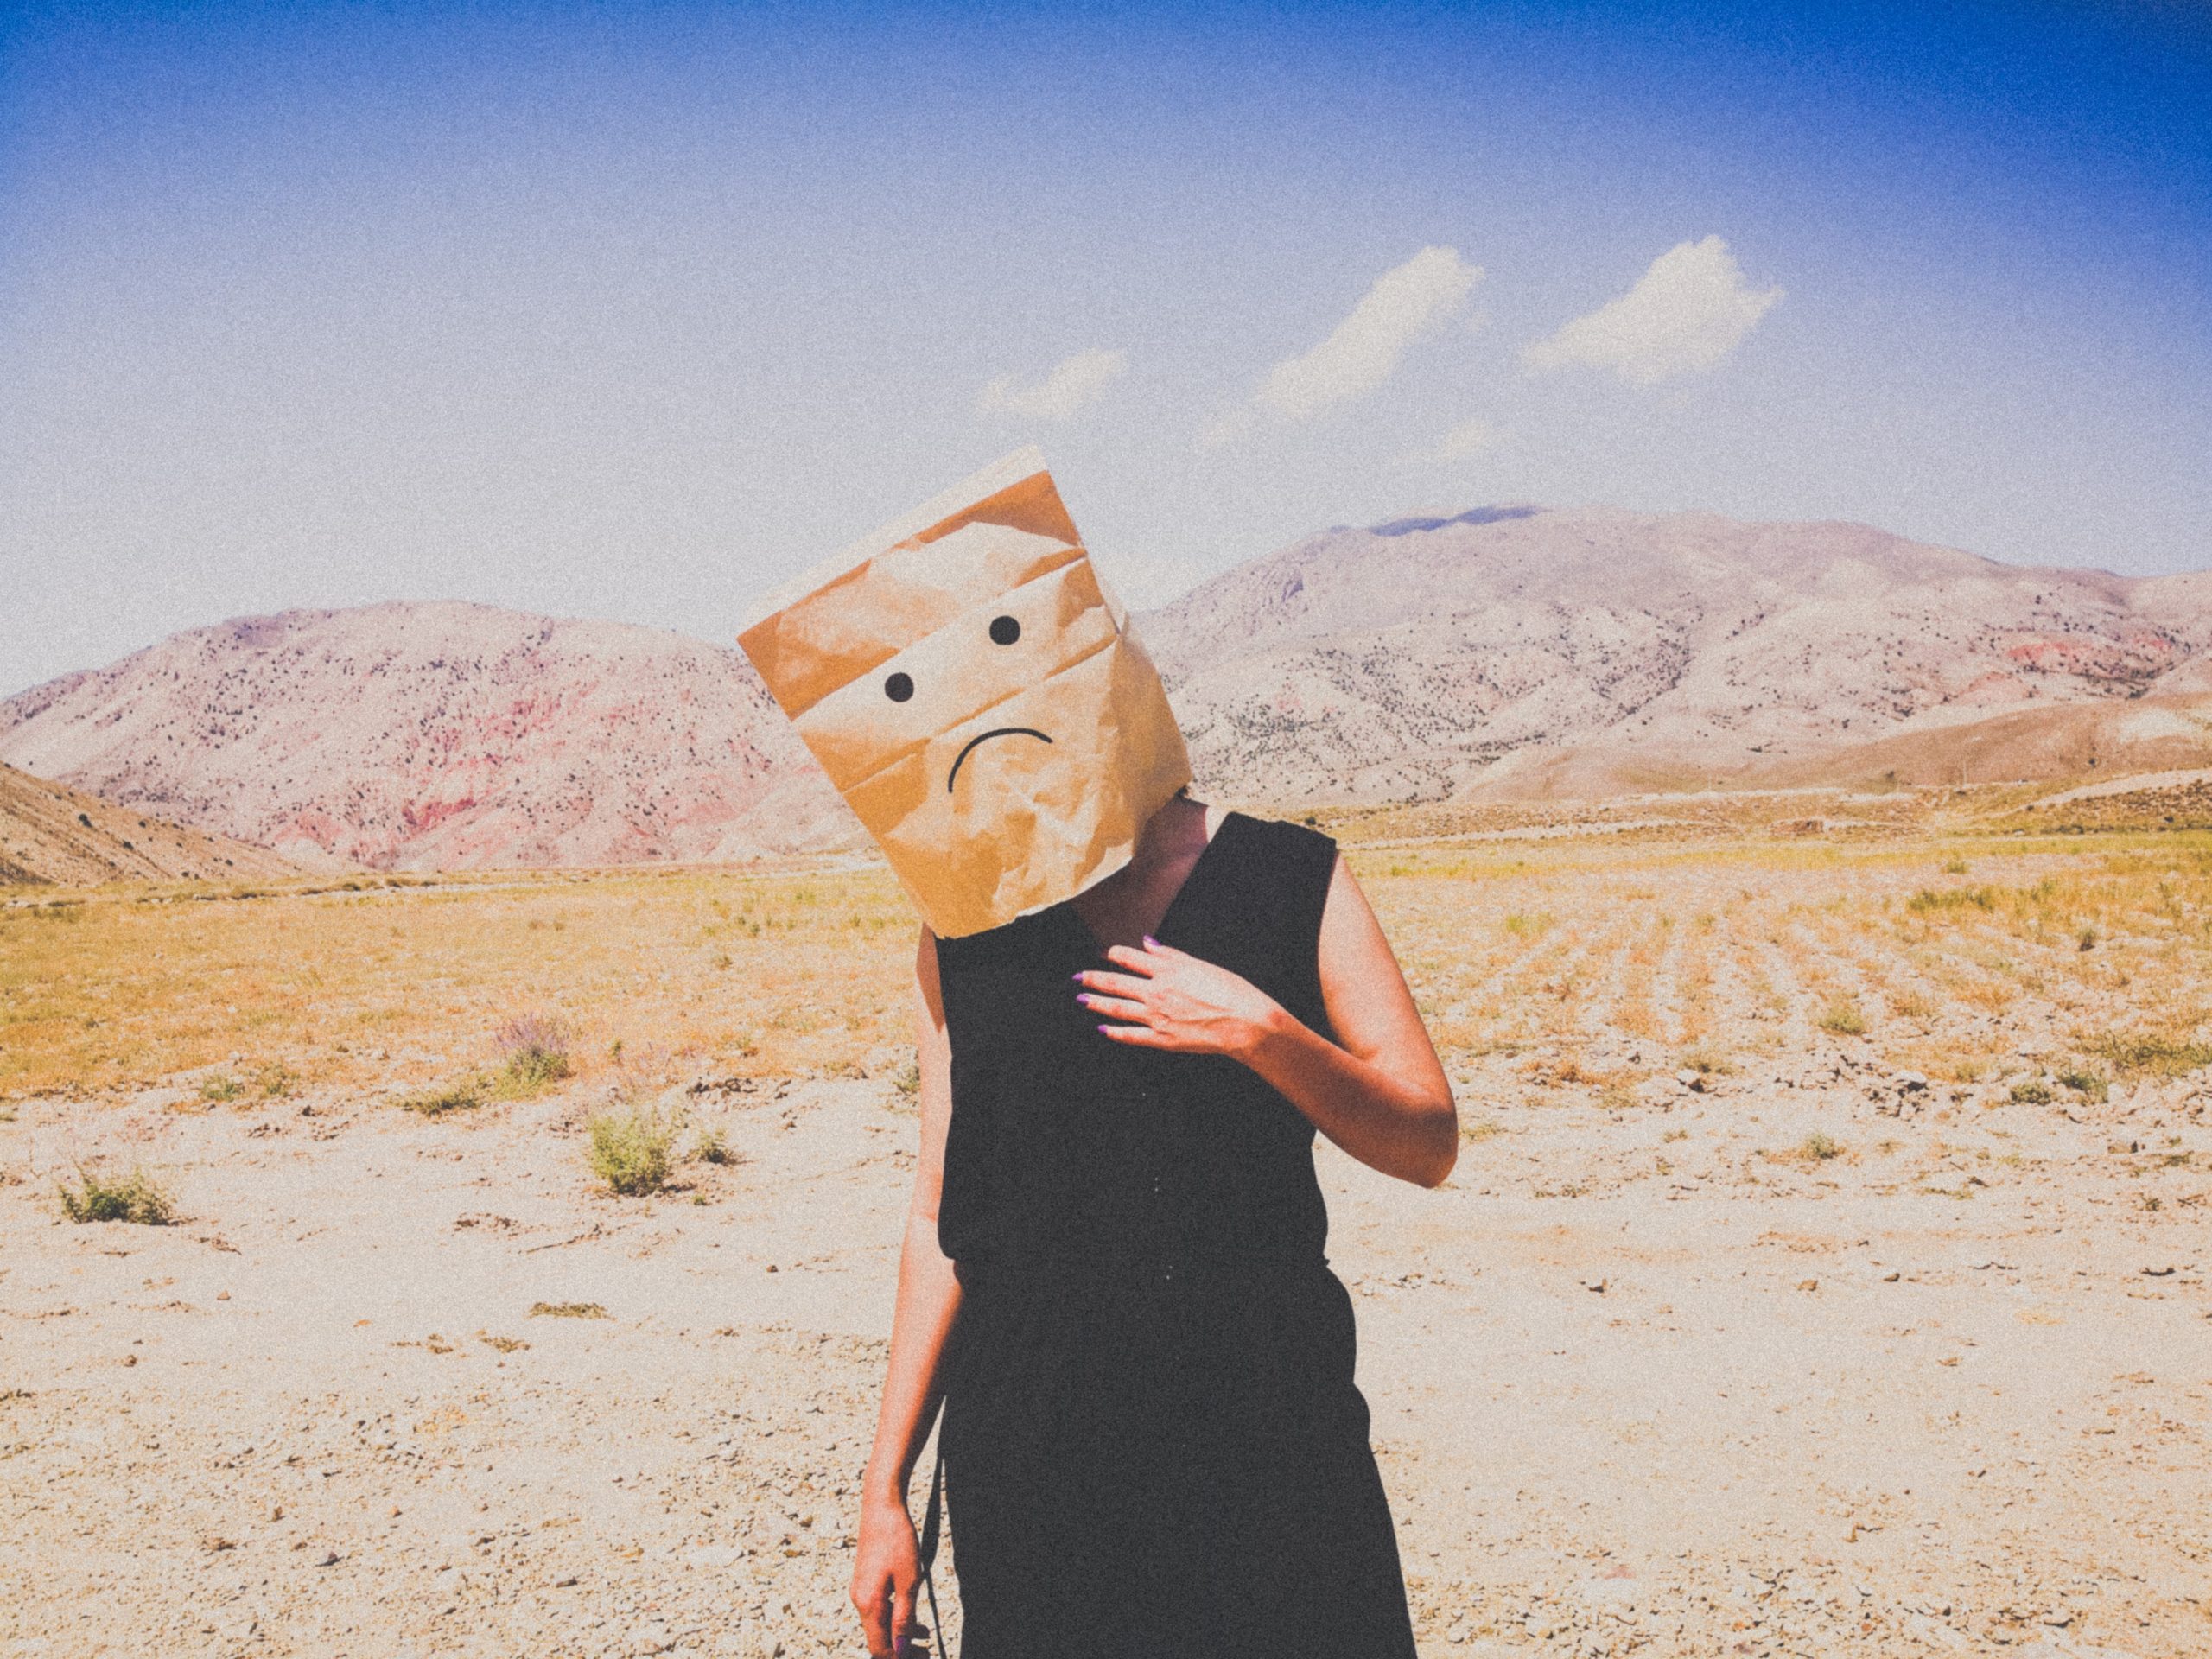 A woman standing in a desert plain with a bag over her head, a sad face drawn on it.